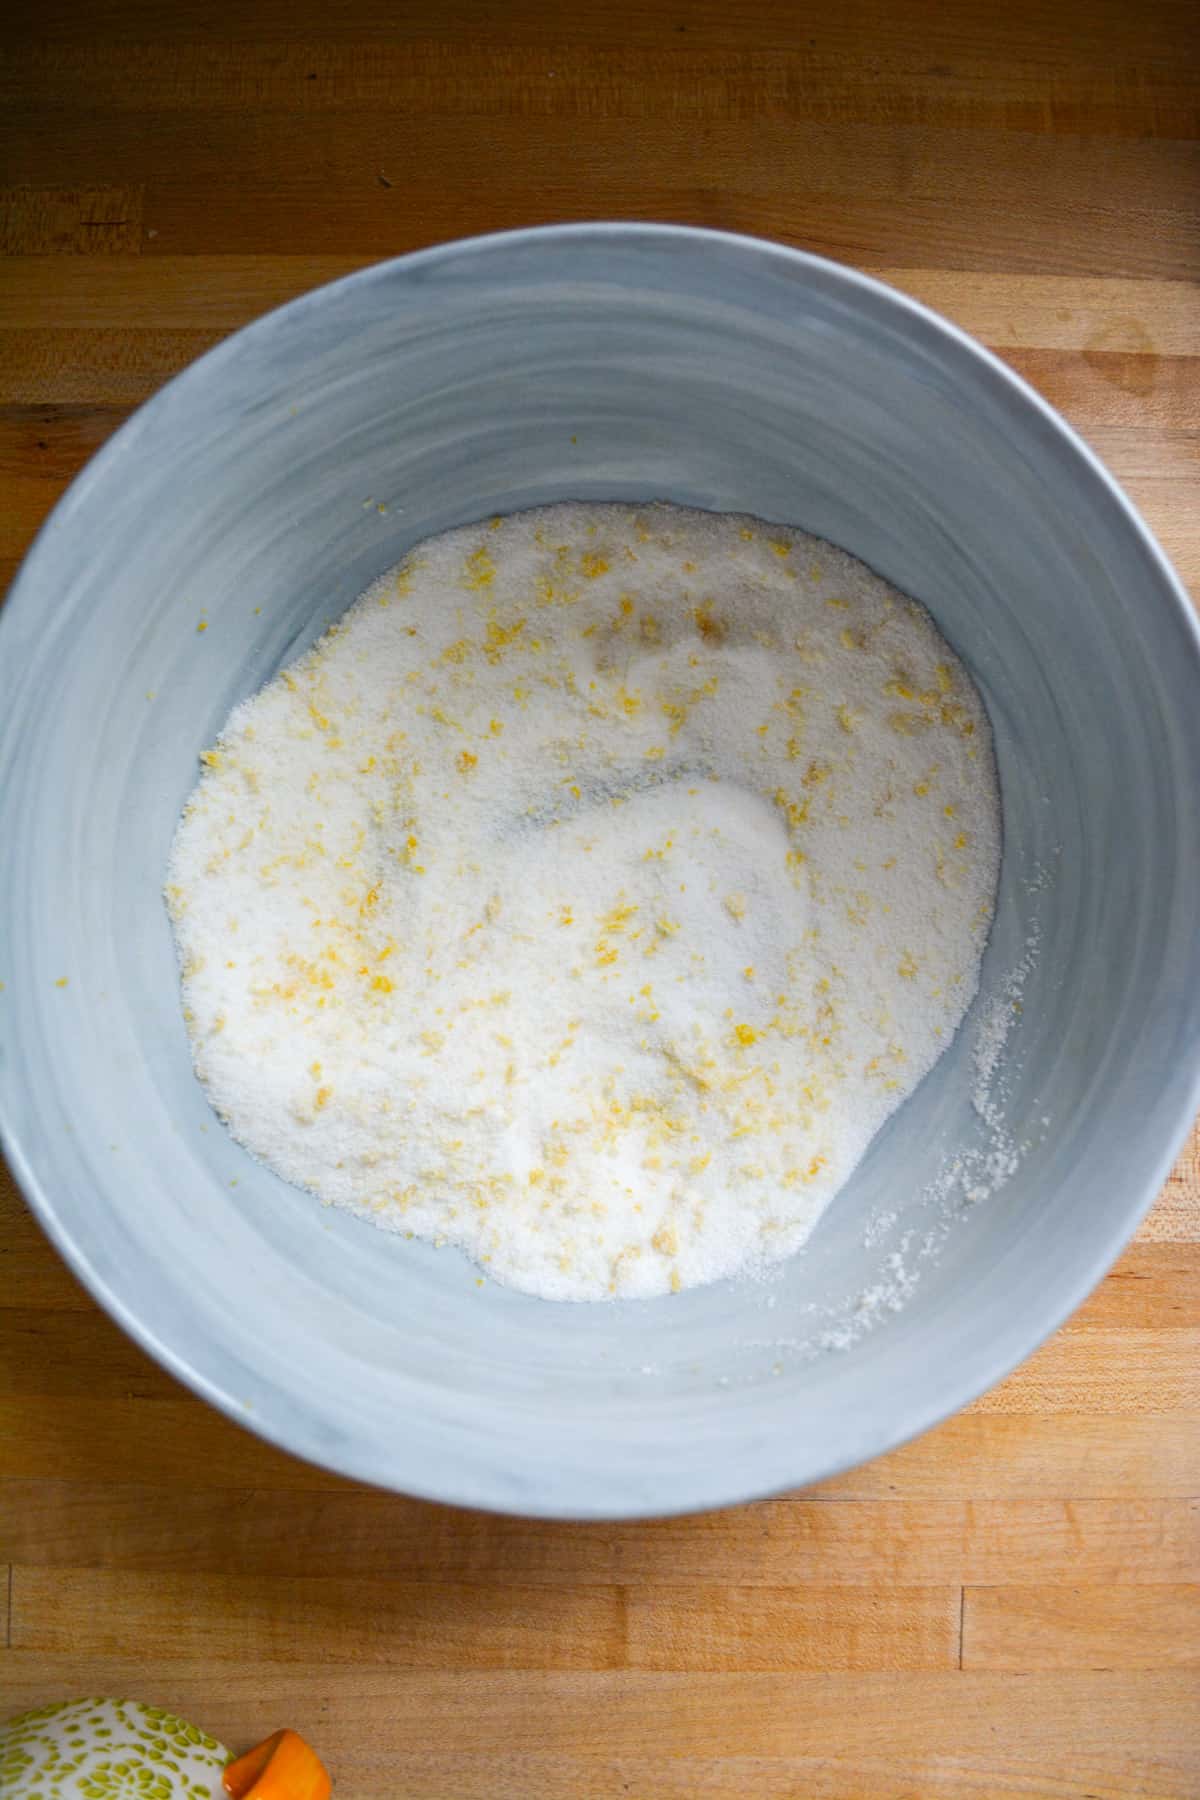 Sugar and lemon zest in a mixing bowl.